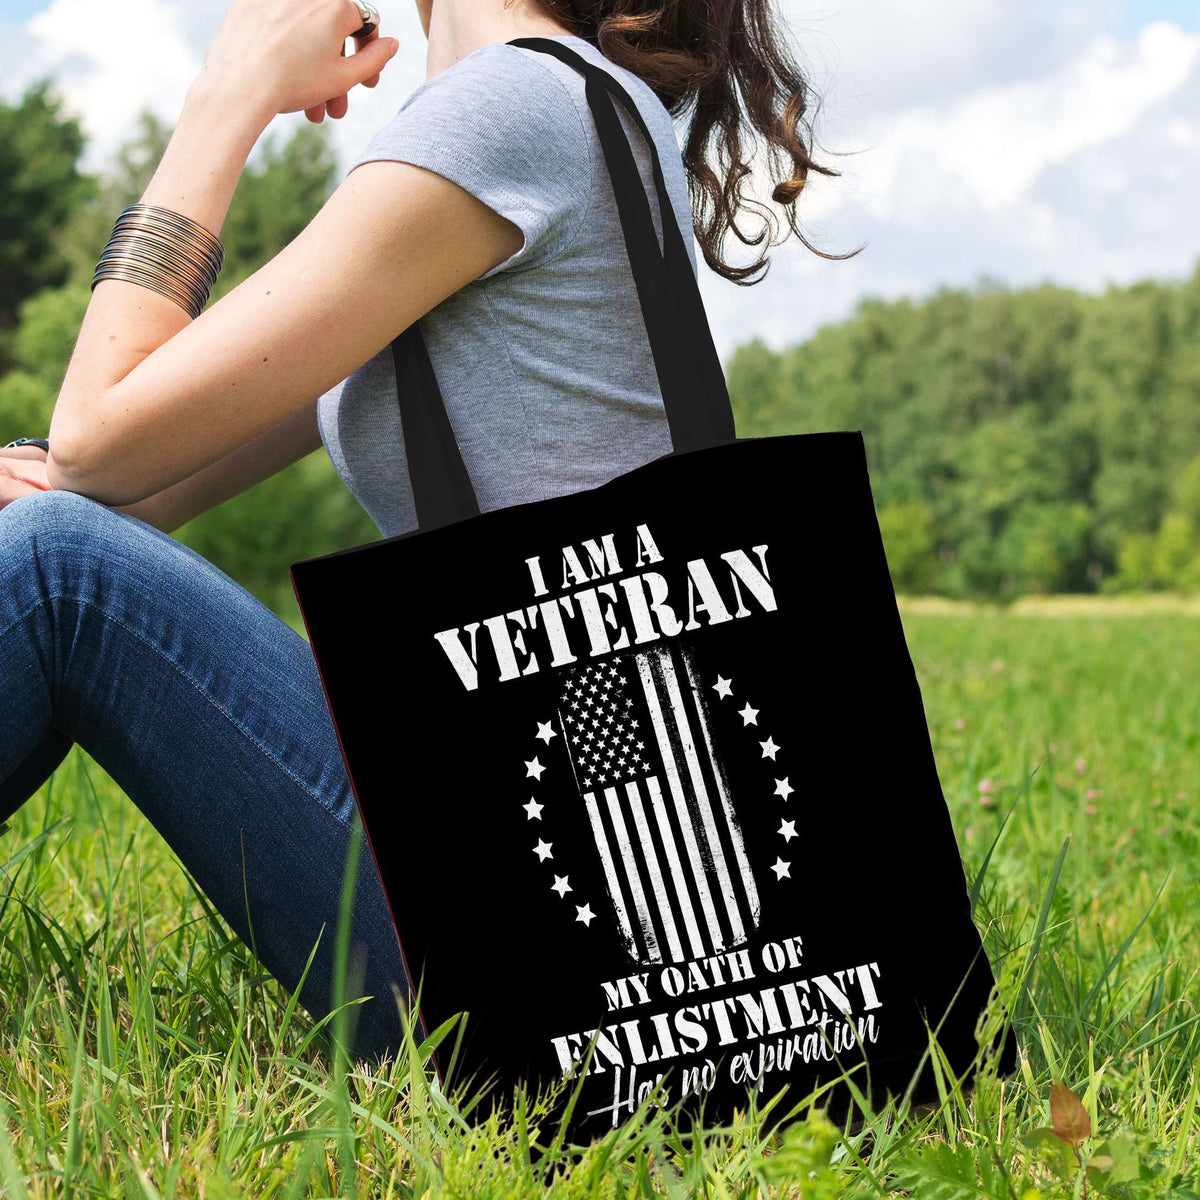 Designs by MyUtopia Shout Out:I Am A Veteran My Oath of Enlistment does not Expire Fabric Totebag Reusable Shopping Tote